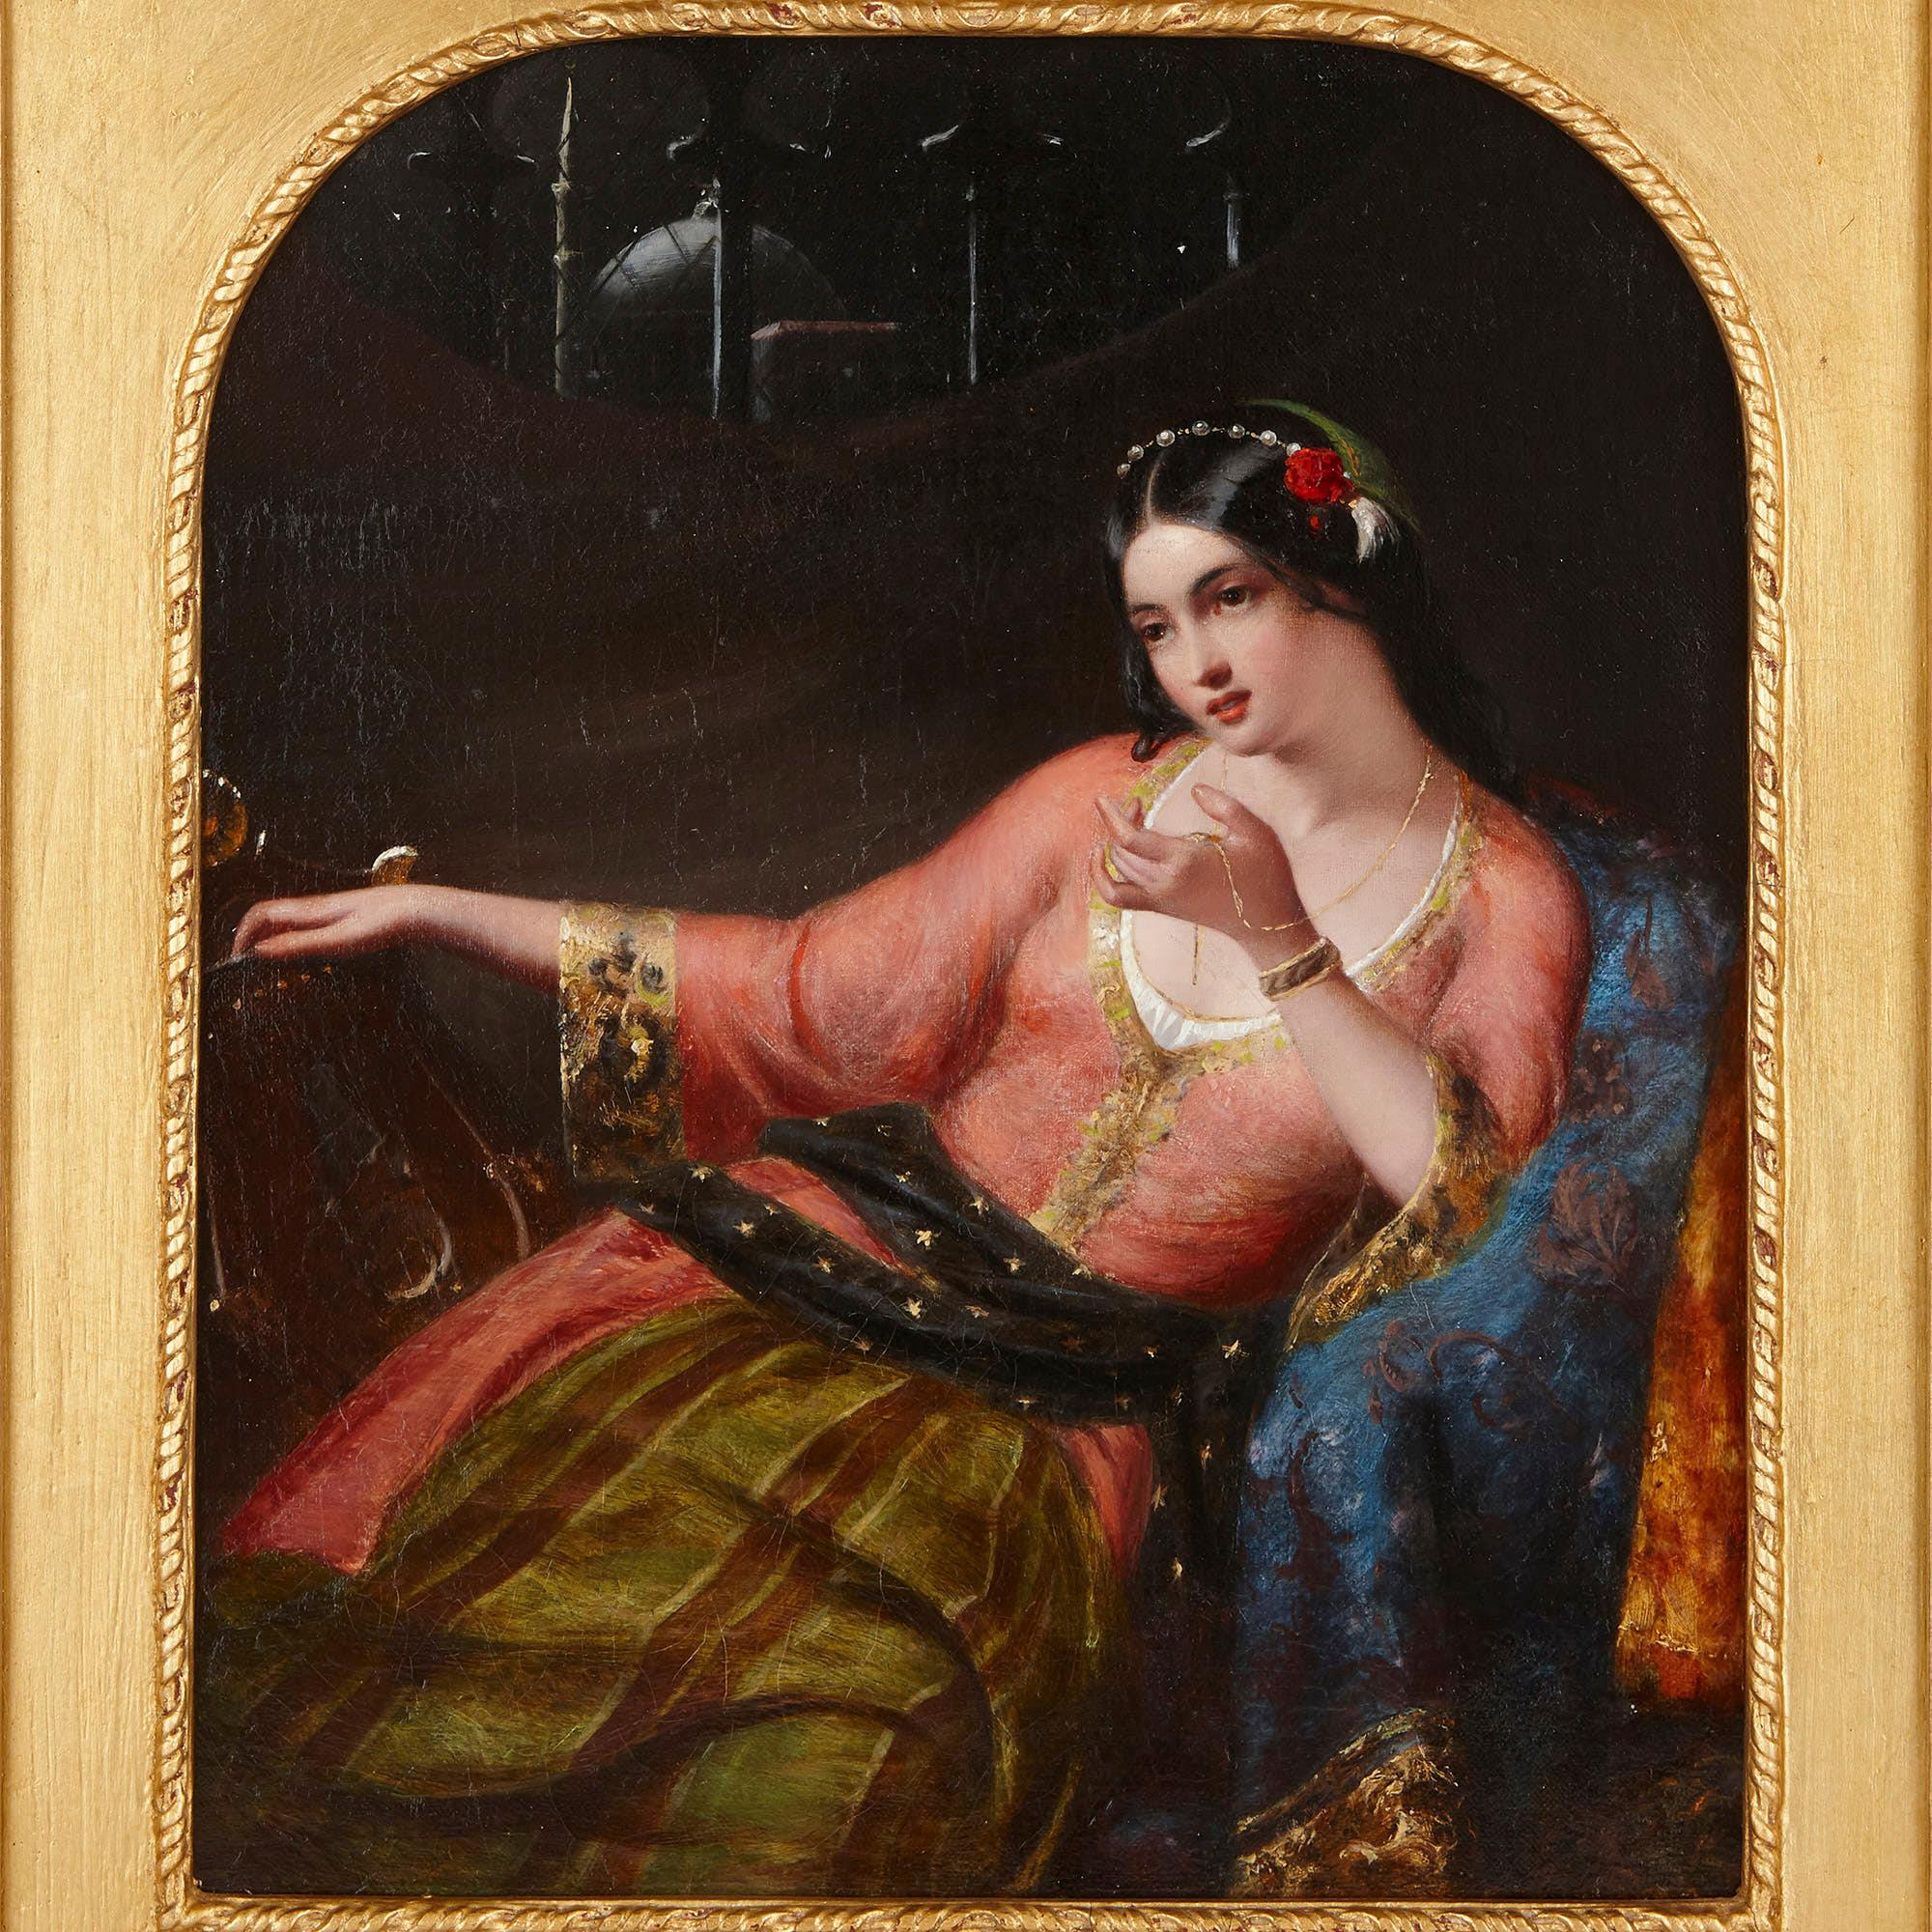 Orientalist harem painting in giltwood frame by O’Neil  - Painting by Henry Nelson O'Neil